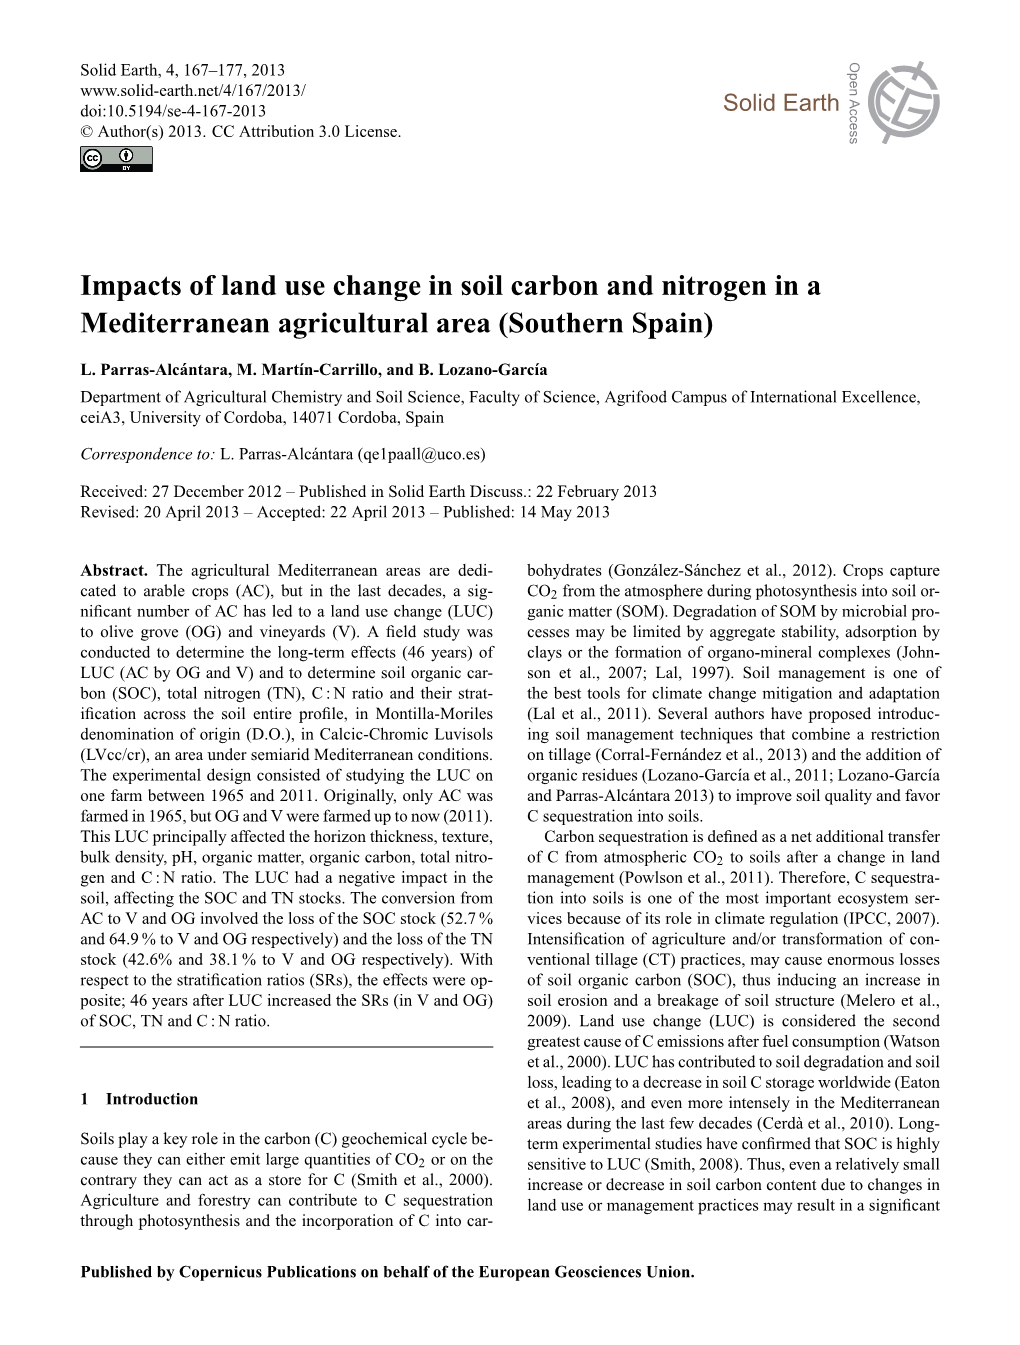 Impacts of Land Use Change in Soil Carbon and Nitrogen in a Mediterranean Agricultural Area (Southern Spain)